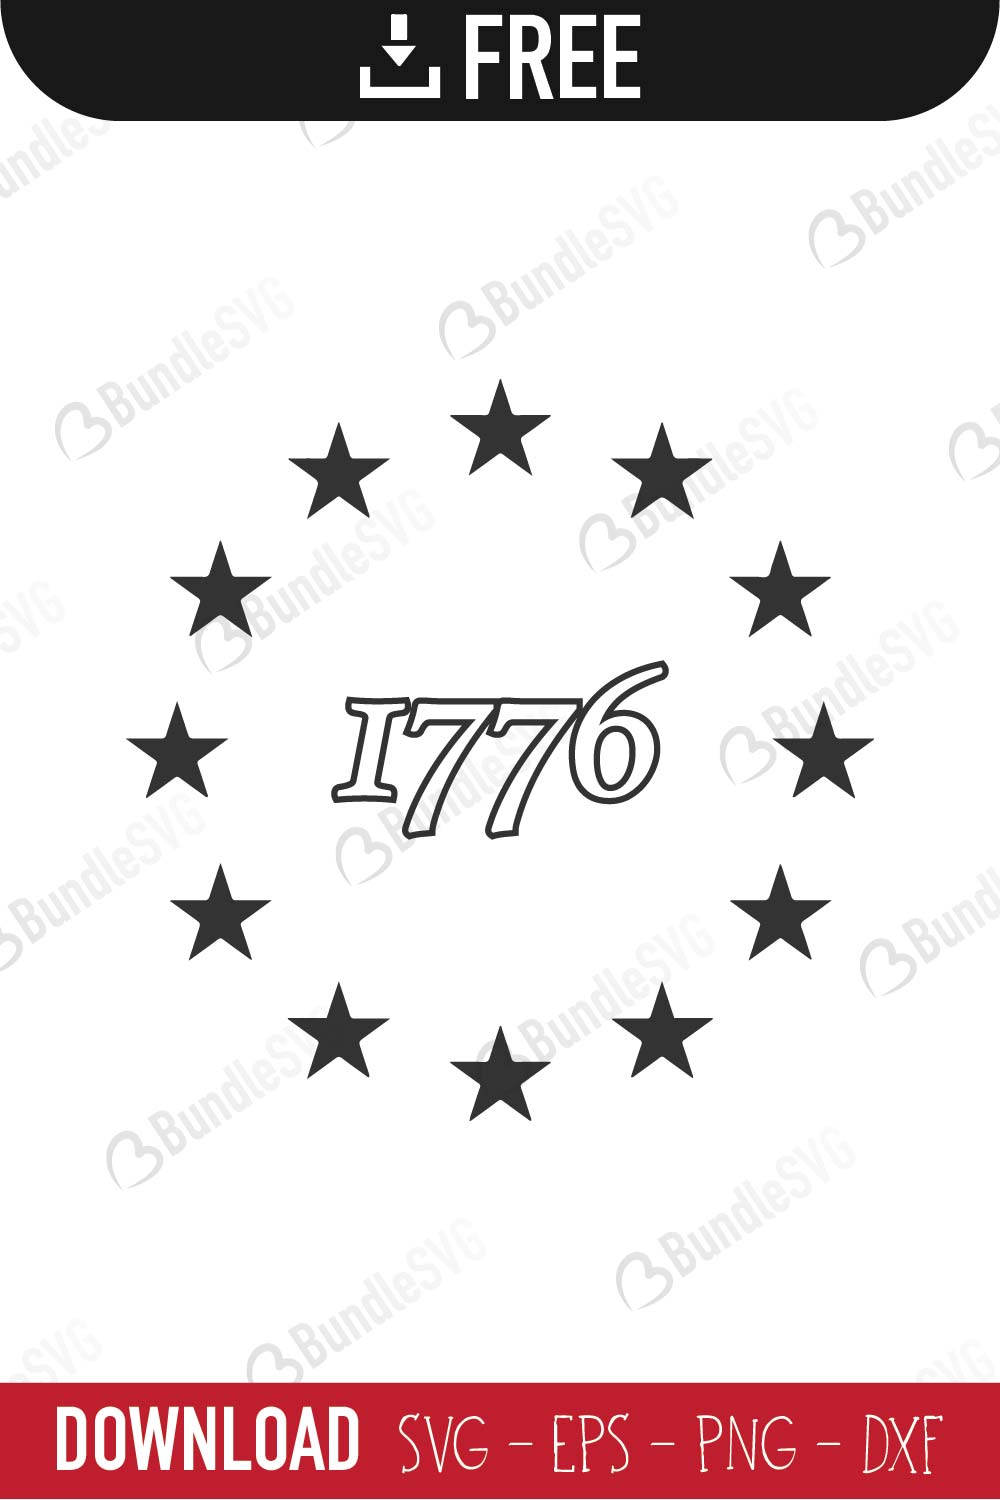 1776 Stars SVG for Circuit/Silhouette DXF for Plasma/Laser 1776 Svg Dxf